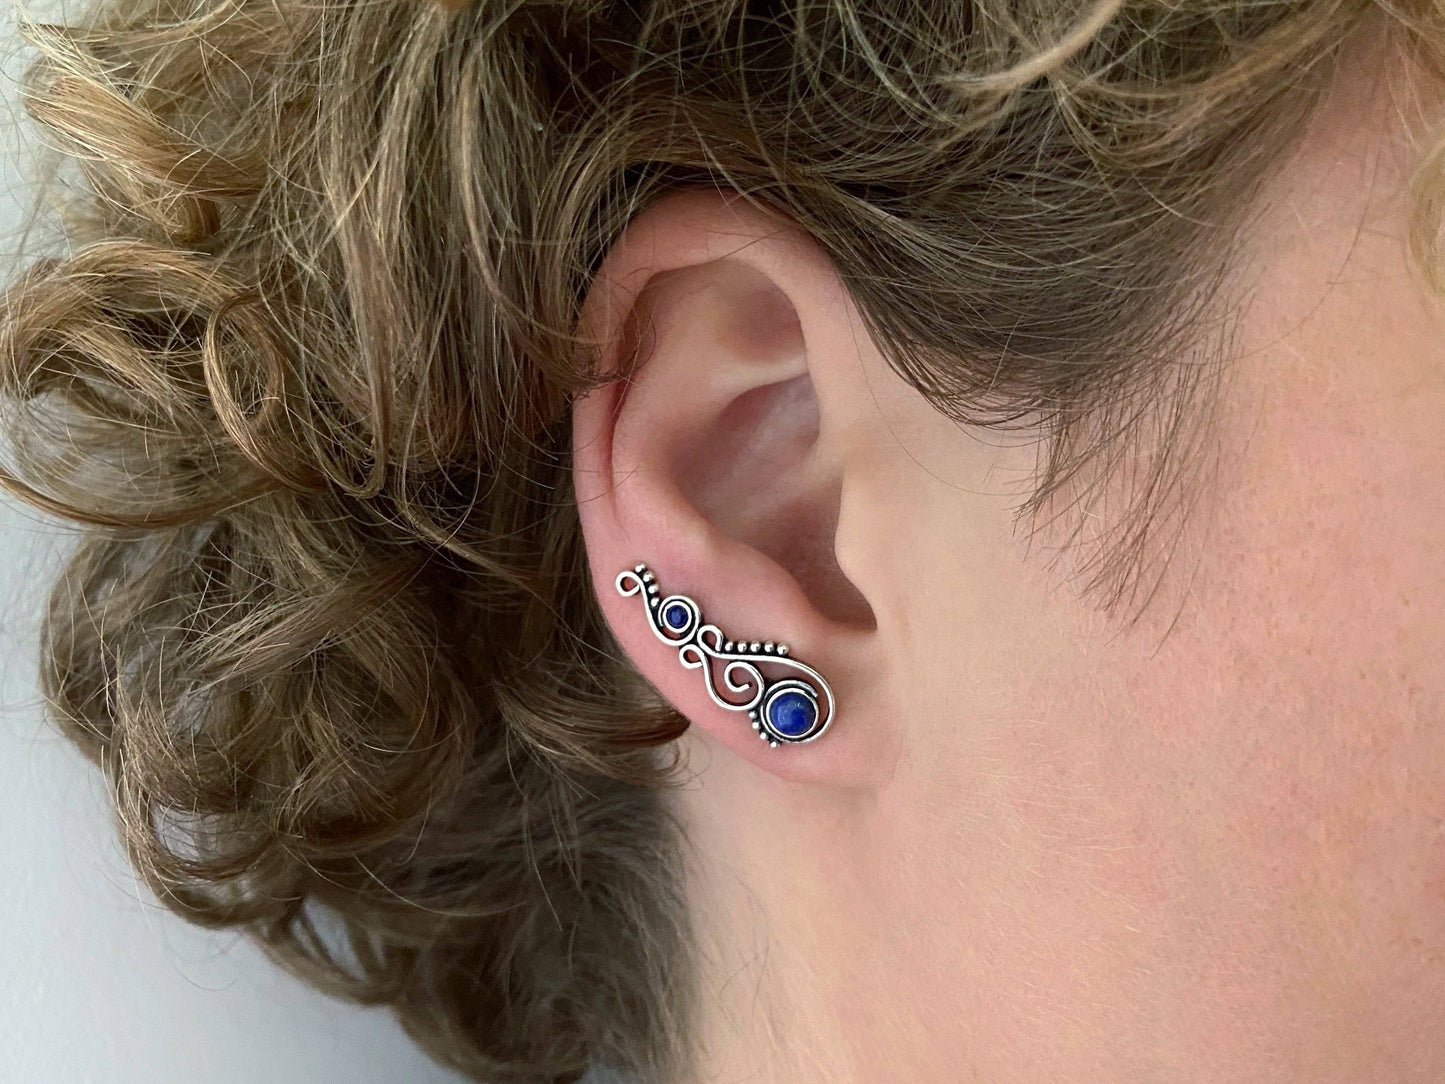 Earclimber earrings with lapis lazuli stones made of silver